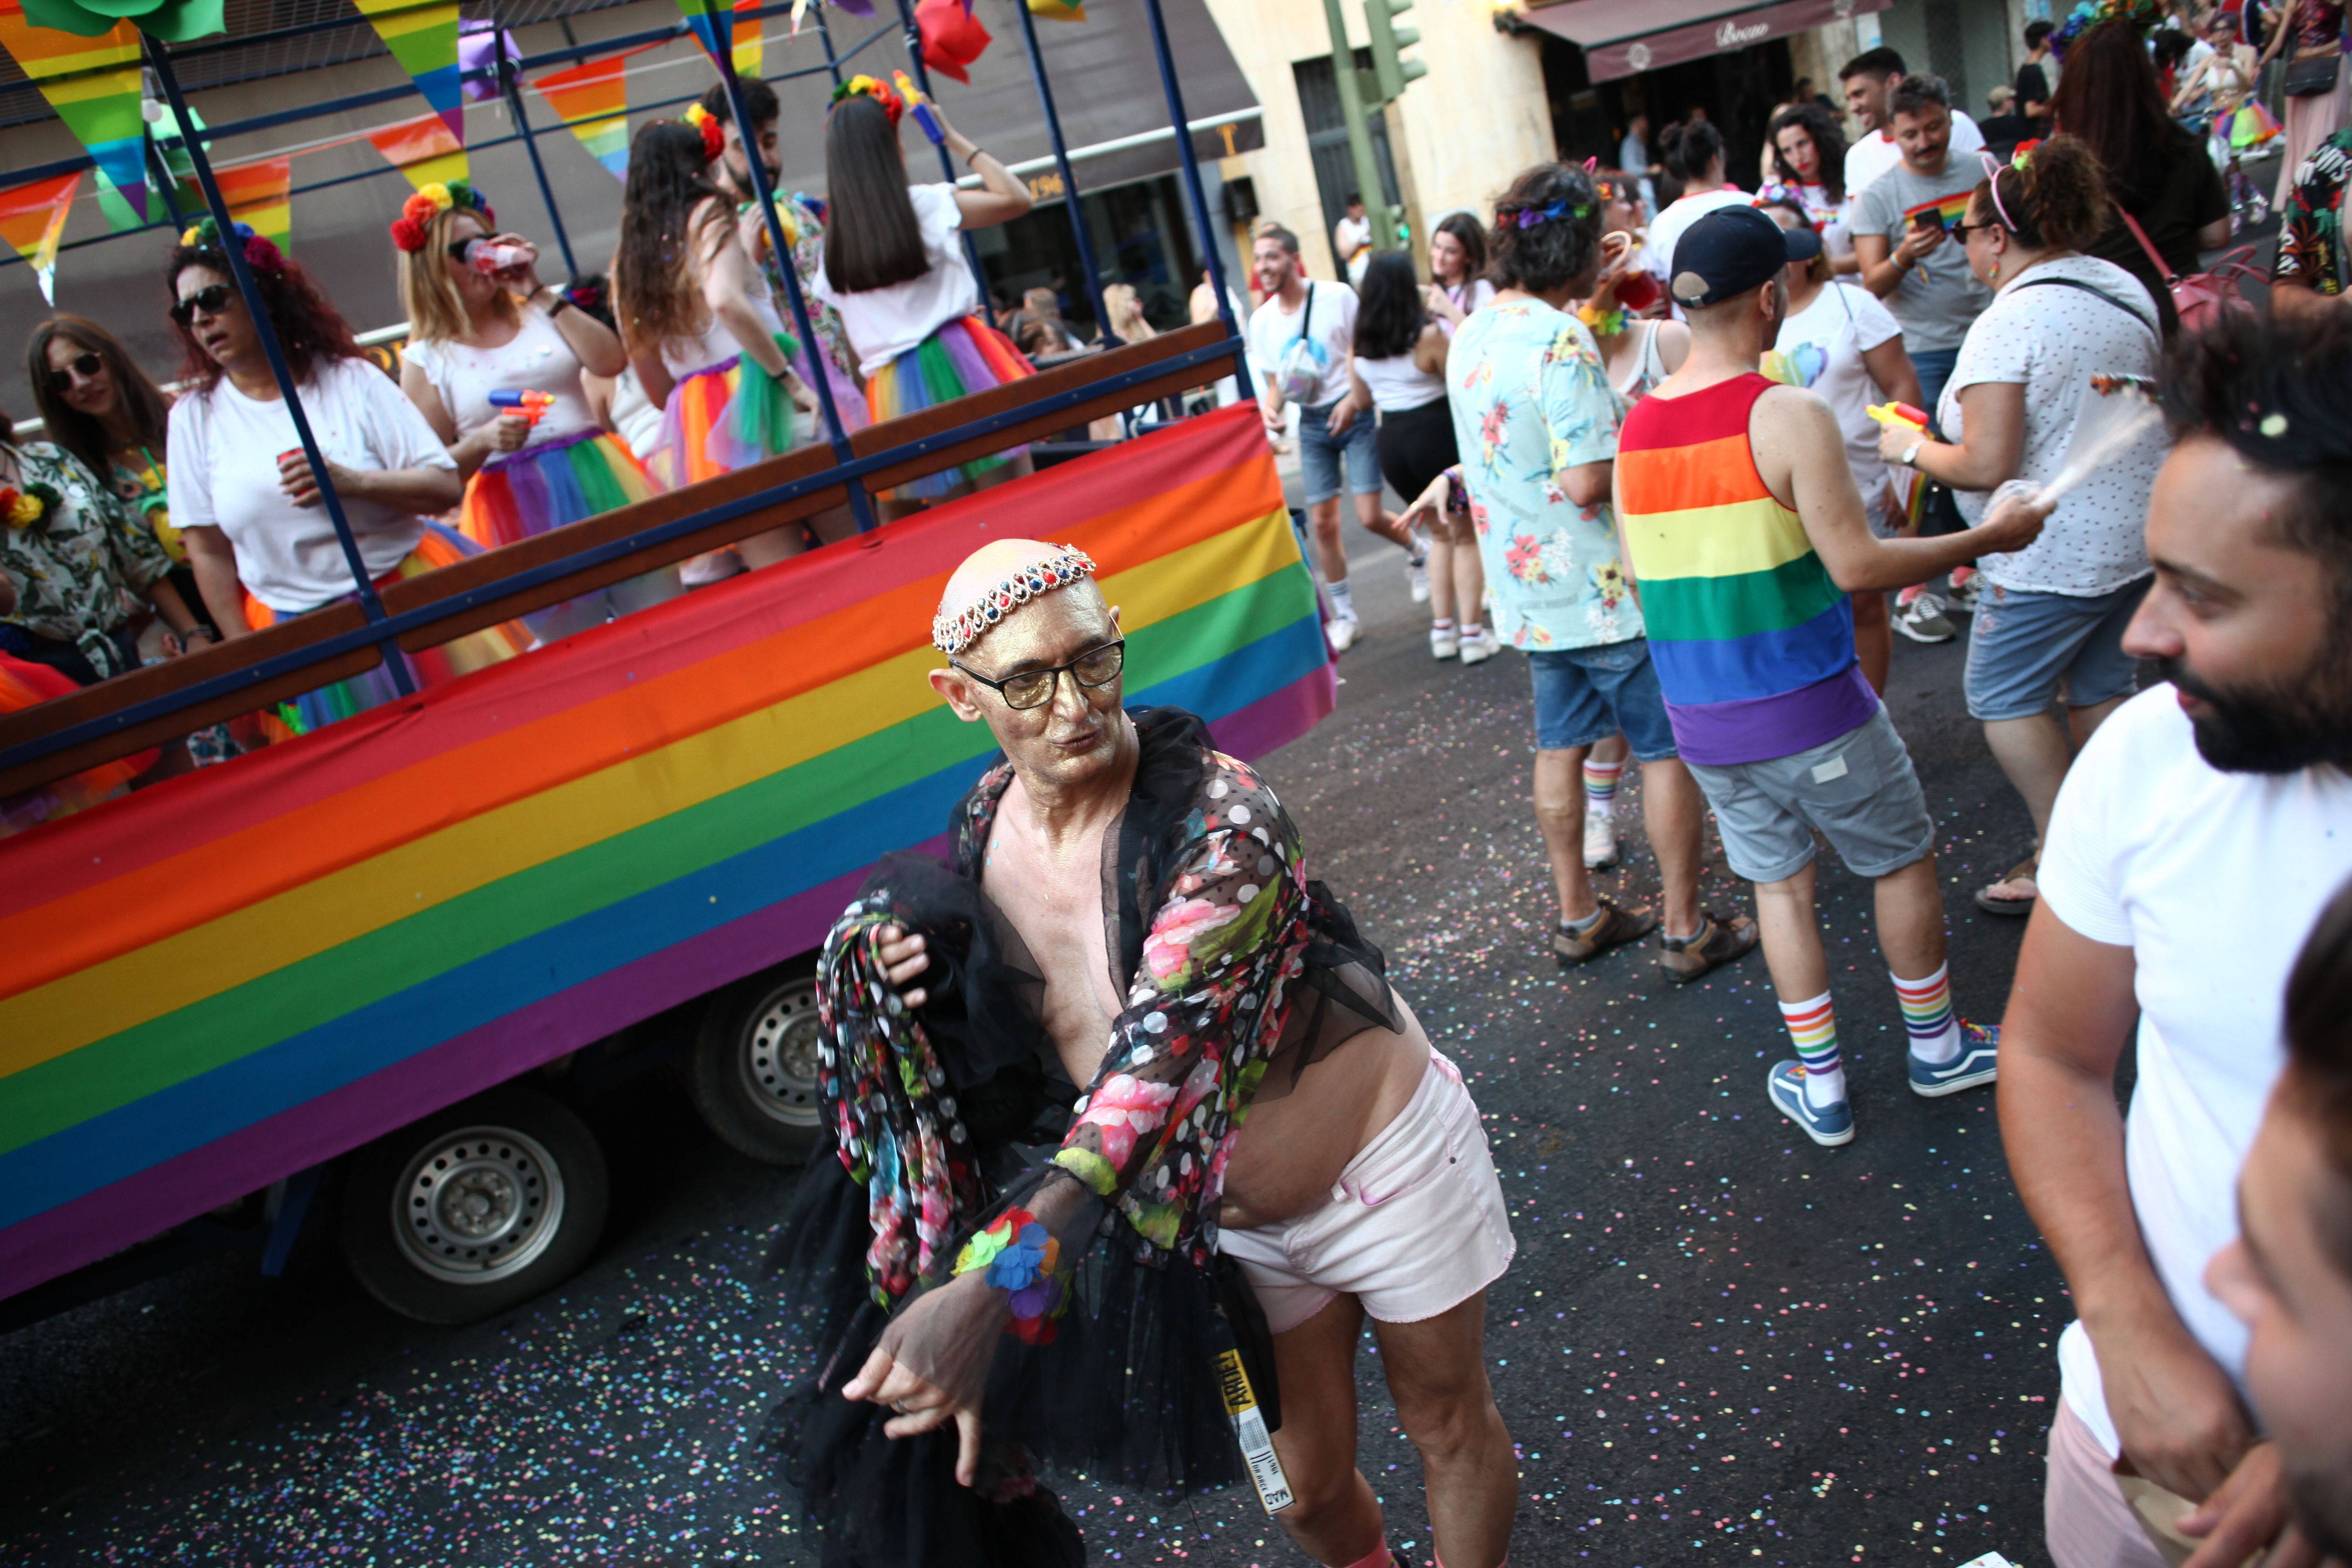 An LGBTQ party on June 29, 2019 in Seville, Spain.